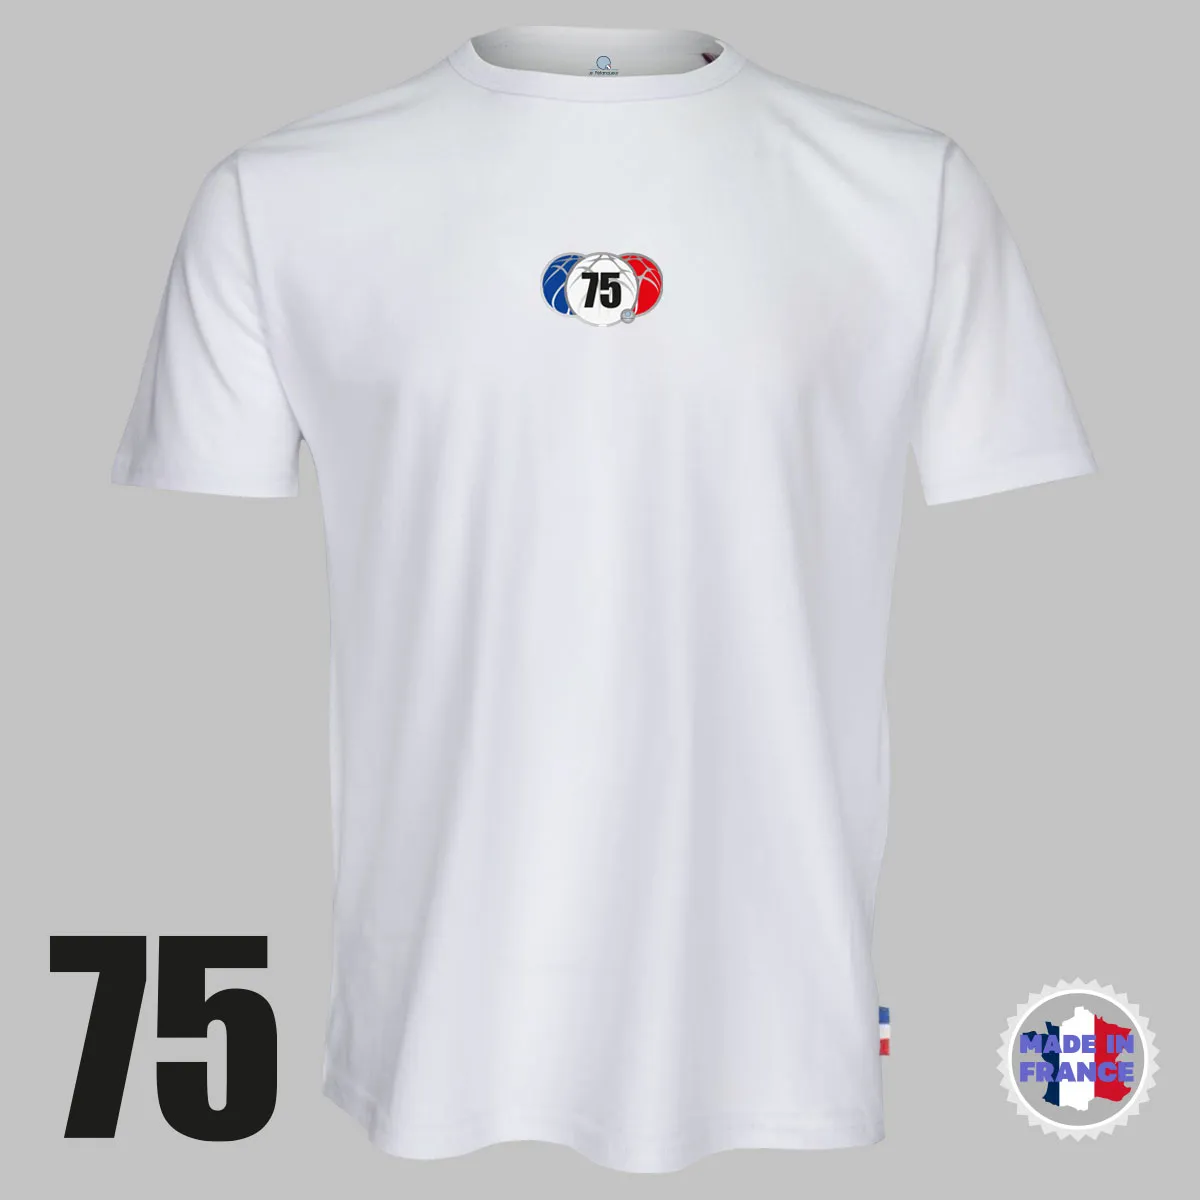 tshirt-made-in-france-coq-france-face-avant